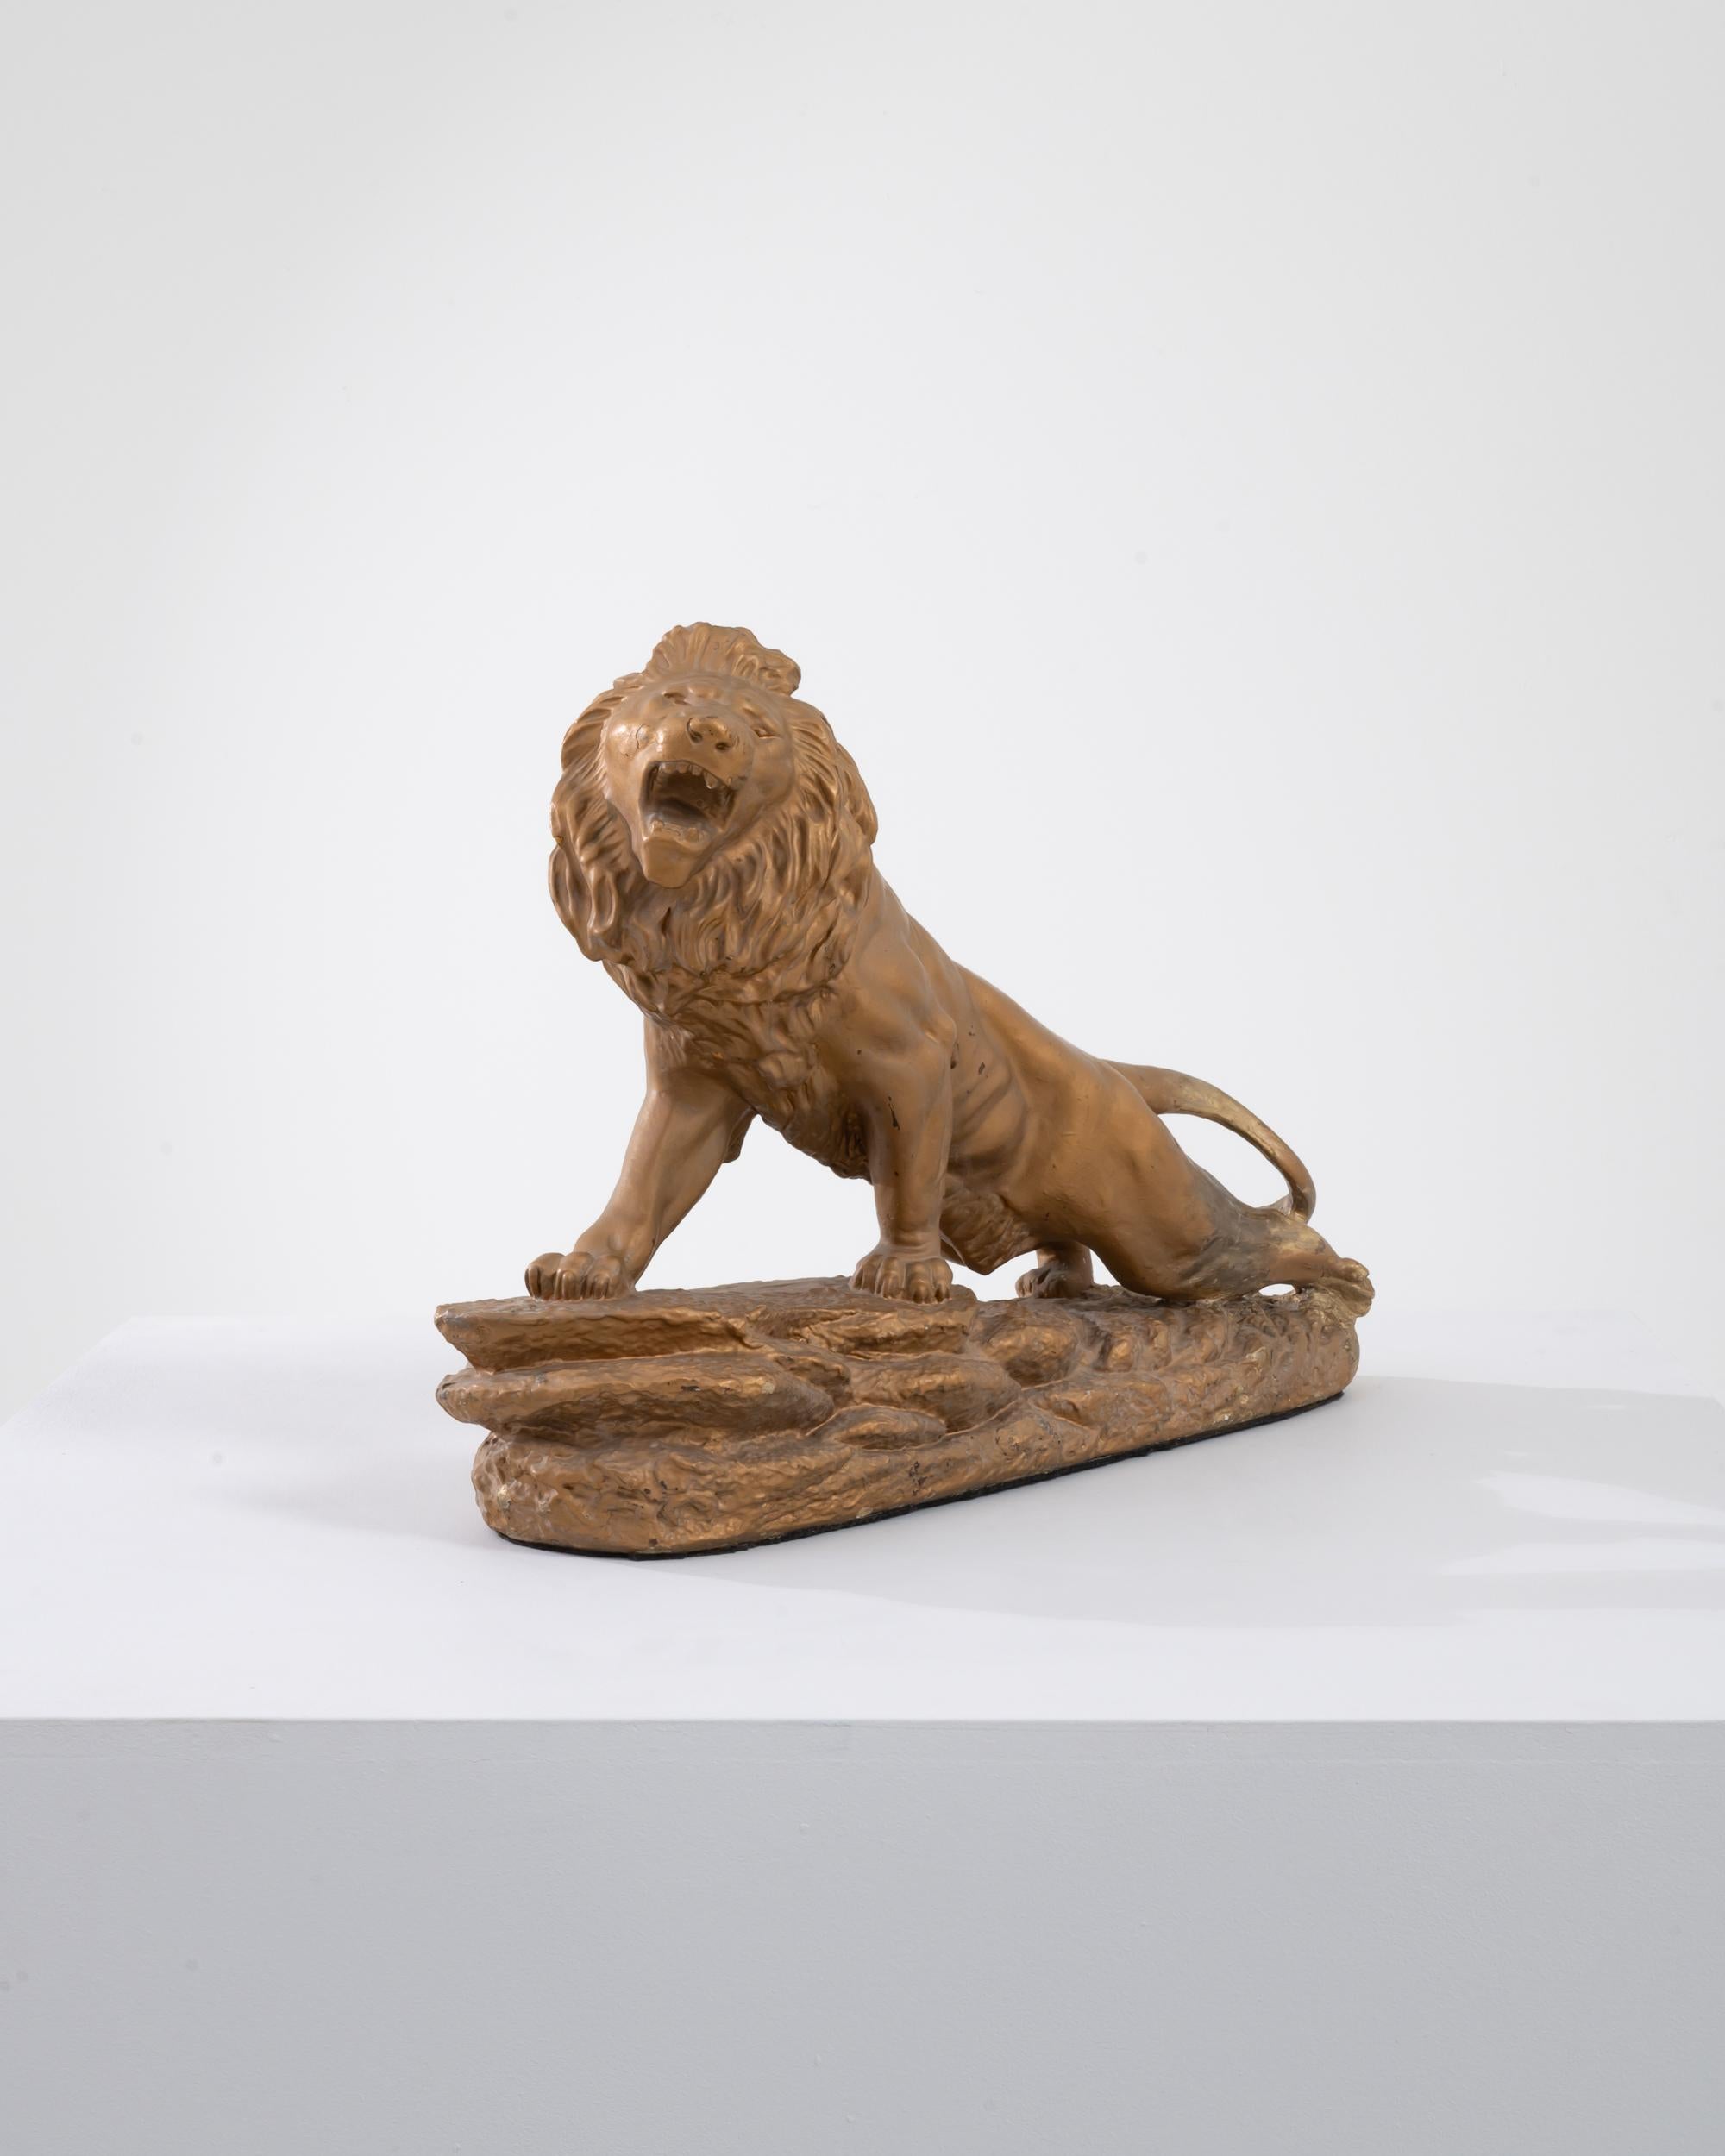 A painted plaster sculpture from 1900s France. This sculpture depicts a lion climbing up to a cliff's edge, with legs stretched back releasing a ferocious roar. The gold paint that coats the plaster cast sculpture has chipped here and there, adding